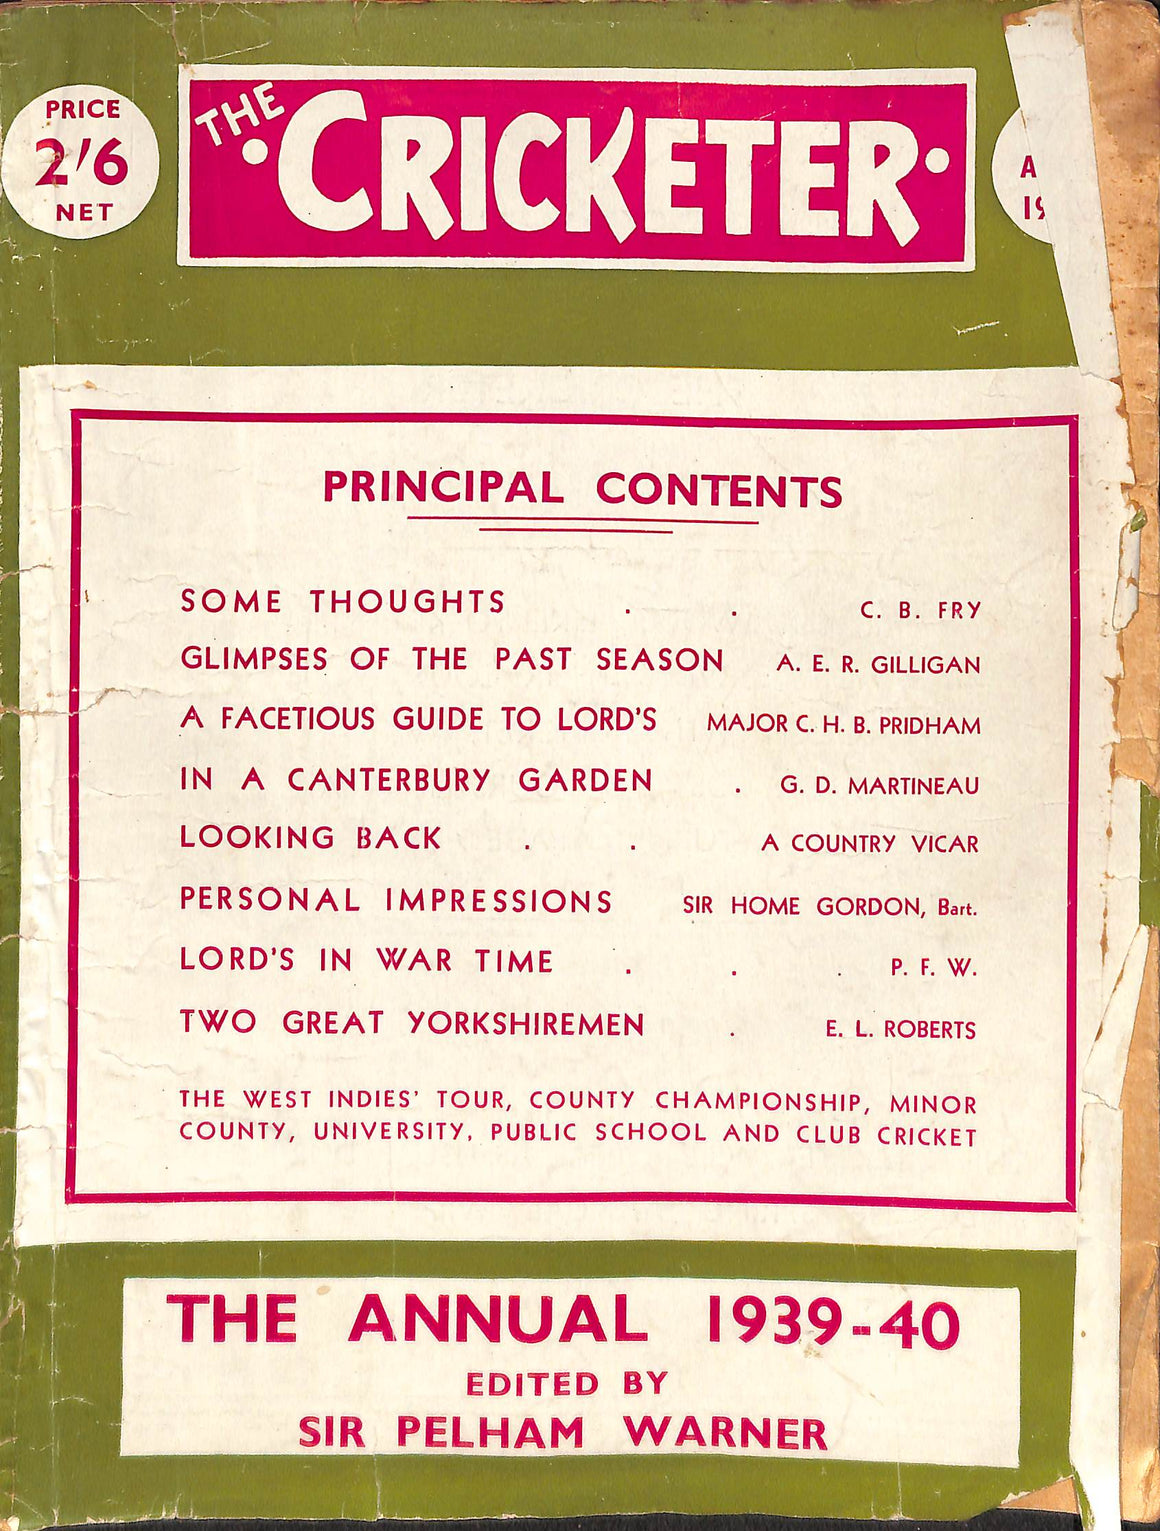 'The Cricketer - The Annual 1939-40'